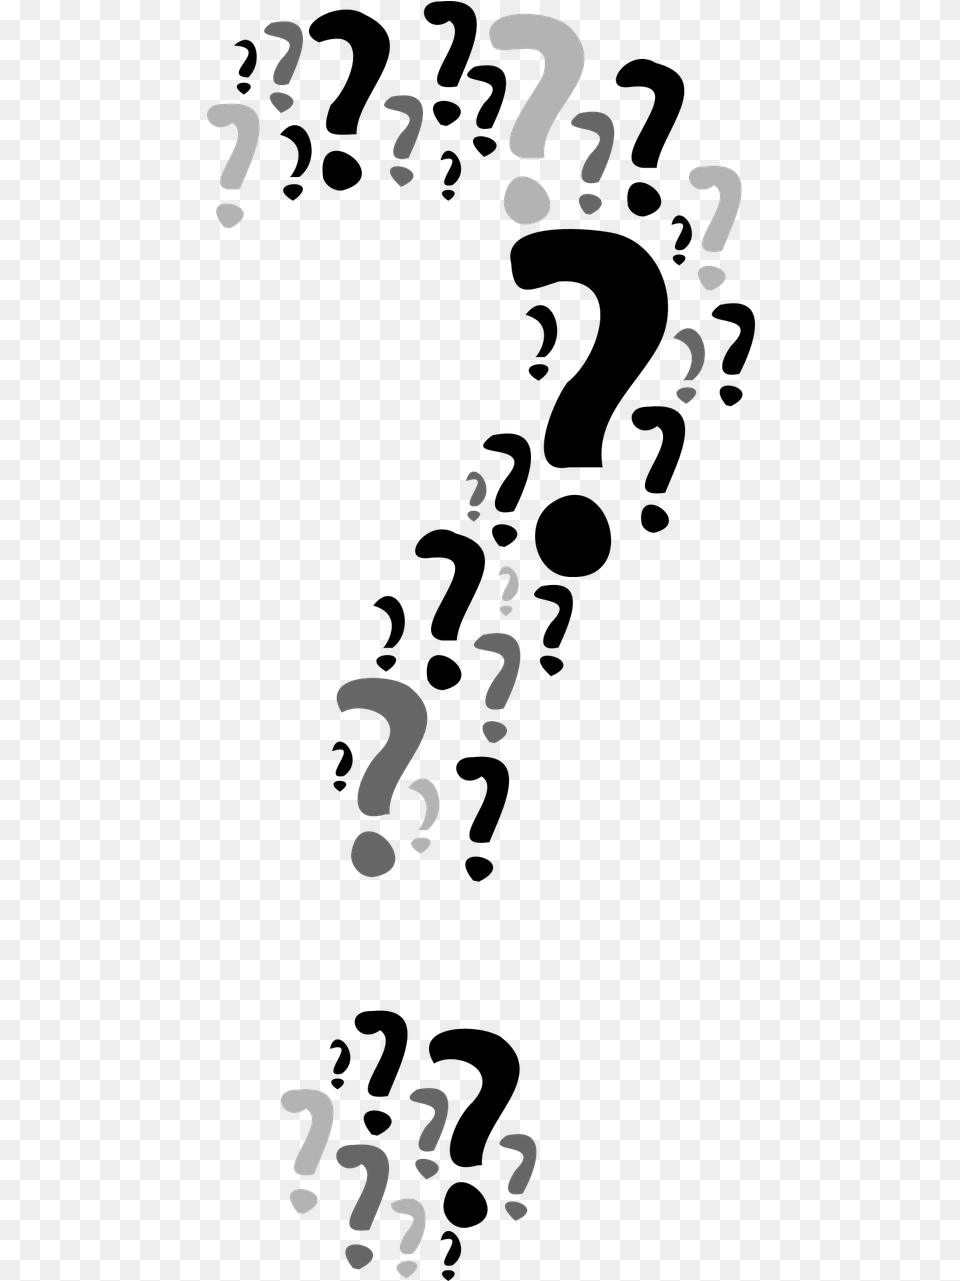 Question Questions The Question Mark Picture Making Right Choices, Text, Number, Symbol, Alphabet Free Png Download